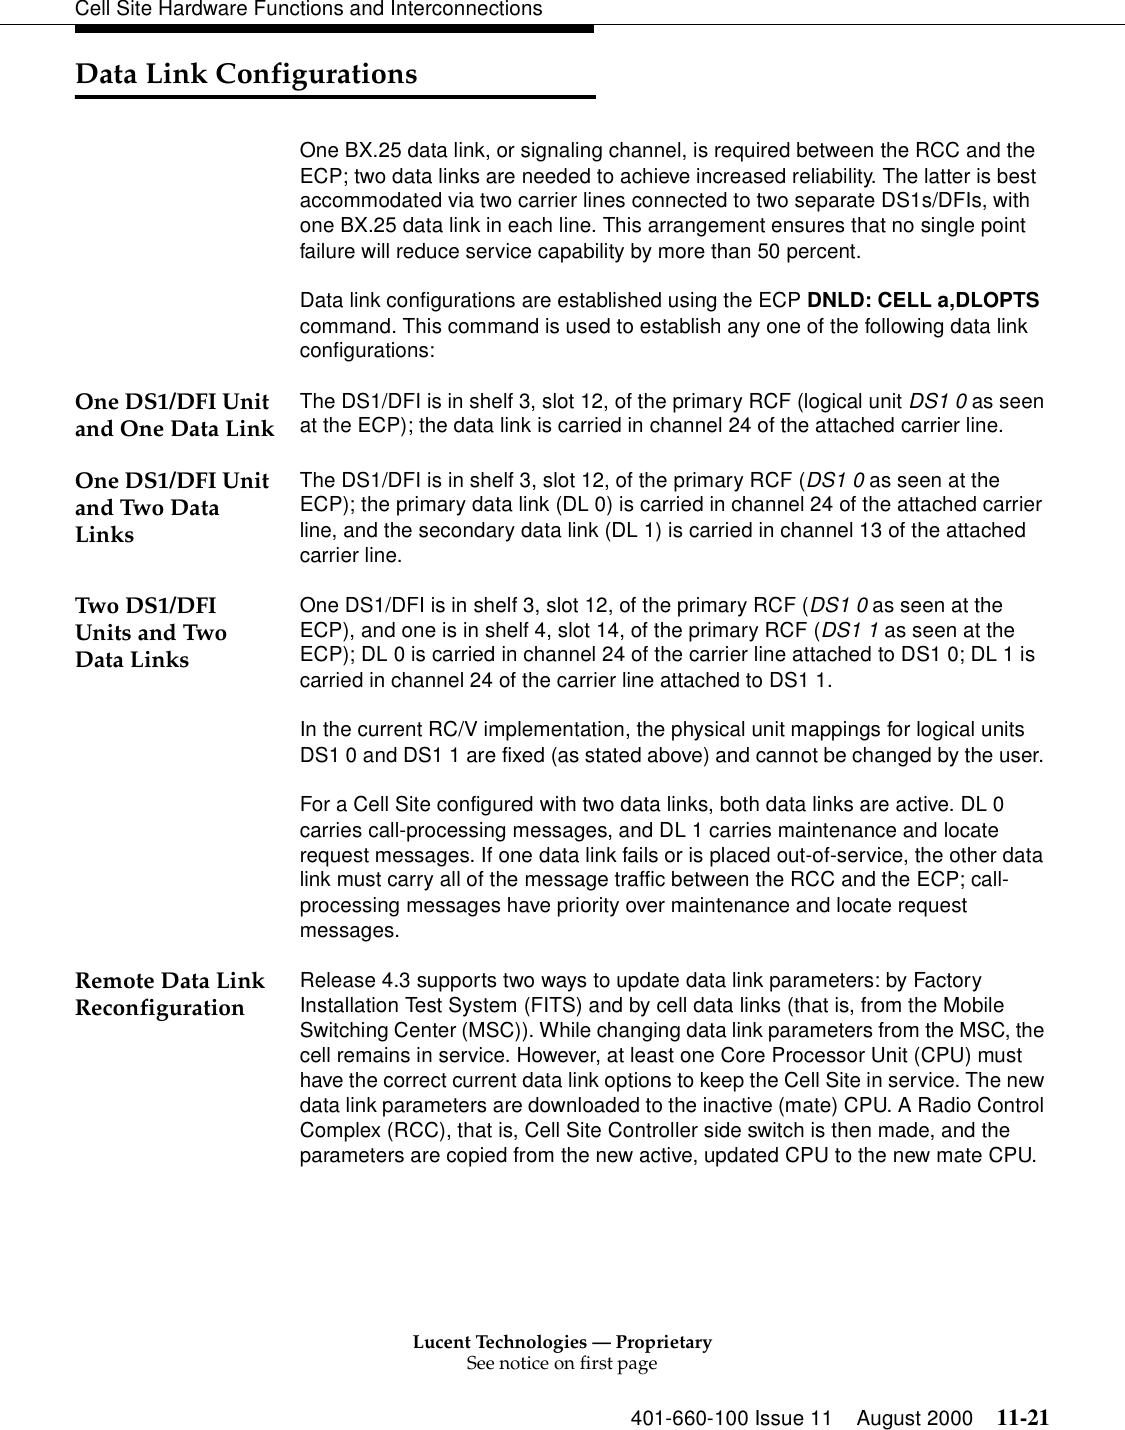 Lucent Technologies — ProprietarySee notice on first page401-660-100 Issue 11 August 2000 11-21Cell Site Hardware Functions and InterconnectionsData Link ConfigurationsOne BX.25 data link, or signaling channel, is required between the RCC and the ECP; two data links are needed to achieve increased reliability. The latter is best accommodated via two carrier lines connected to two separate DS1s/DFIs, with one BX.25 data link in each line. This arrangement ensures that no single point failure will reduce service capability by more than 50 percent.Data link configurations are established using the ECP DNLD: CELL a,DLOPTS command. This command is used to establish any one of the following data link configurations:One DS1/DFI Unit and One Data Link The DS1/DFI is in shelf 3, slot 12, of the primary RCF (logical unit DS1 0 as seen at the ECP); the data link is carried in channel 24 of the attached carrier line.One DS1/DFI Unit and Two Data LinksThe DS1/DFI is in shelf 3, slot 12, of the primary RCF (DS1 0 as seen at the ECP); the primary data link (DL 0) is carried in channel 24 of the attached carrier line, and the secondary data link (DL 1) is carried in channel 13 of the attached carrier line.Two DS1/DFI Units and Two Data LinksOne DS1/DFI is in shelf 3, slot 12, of the primary RCF (DS1 0 as seen at the ECP), and one is in shelf 4, slot 14, of the primary RCF (DS1 1 as seen at the ECP); DL 0 is carried in channel 24 of the carrier line attached to DS1 0; DL 1 is carried in channel 24 of the carrier line attached to DS1 1.In the current RC/V implementation, the physical unit mappings for logical units DS1 0 and DS1 1 are fixed (as stated above) and cannot be changed by the user. For a Cell Site configured with two data links, both data links are active. DL 0 carries call-processing messages, and DL 1 carries maintenance and locate request messages. If one data link fails or is placed out-of-service, the other data link must carry all of the message traffic between the RCC and the ECP; call-processing messages have priority over maintenance and locate request messages.Remote Data Link Reconfiguration  Release 4.3 supports two ways to update data link parameters: by Factory Installation Test System (FITS) and by cell data links (that is, from the Mobile Switching Center (MSC)). While changing data link parameters from the MSC, the cell remains in service. However, at least one Core Processor Unit (CPU) must have the correct current data link options to keep the Cell Site in service. The new data link parameters are downloaded to the inactive (mate) CPU. A Radio Control Complex (RCC), that is, Cell Site Controller side switch is then made, and the parameters are copied from the new active, updated CPU to the new mate CPU. 